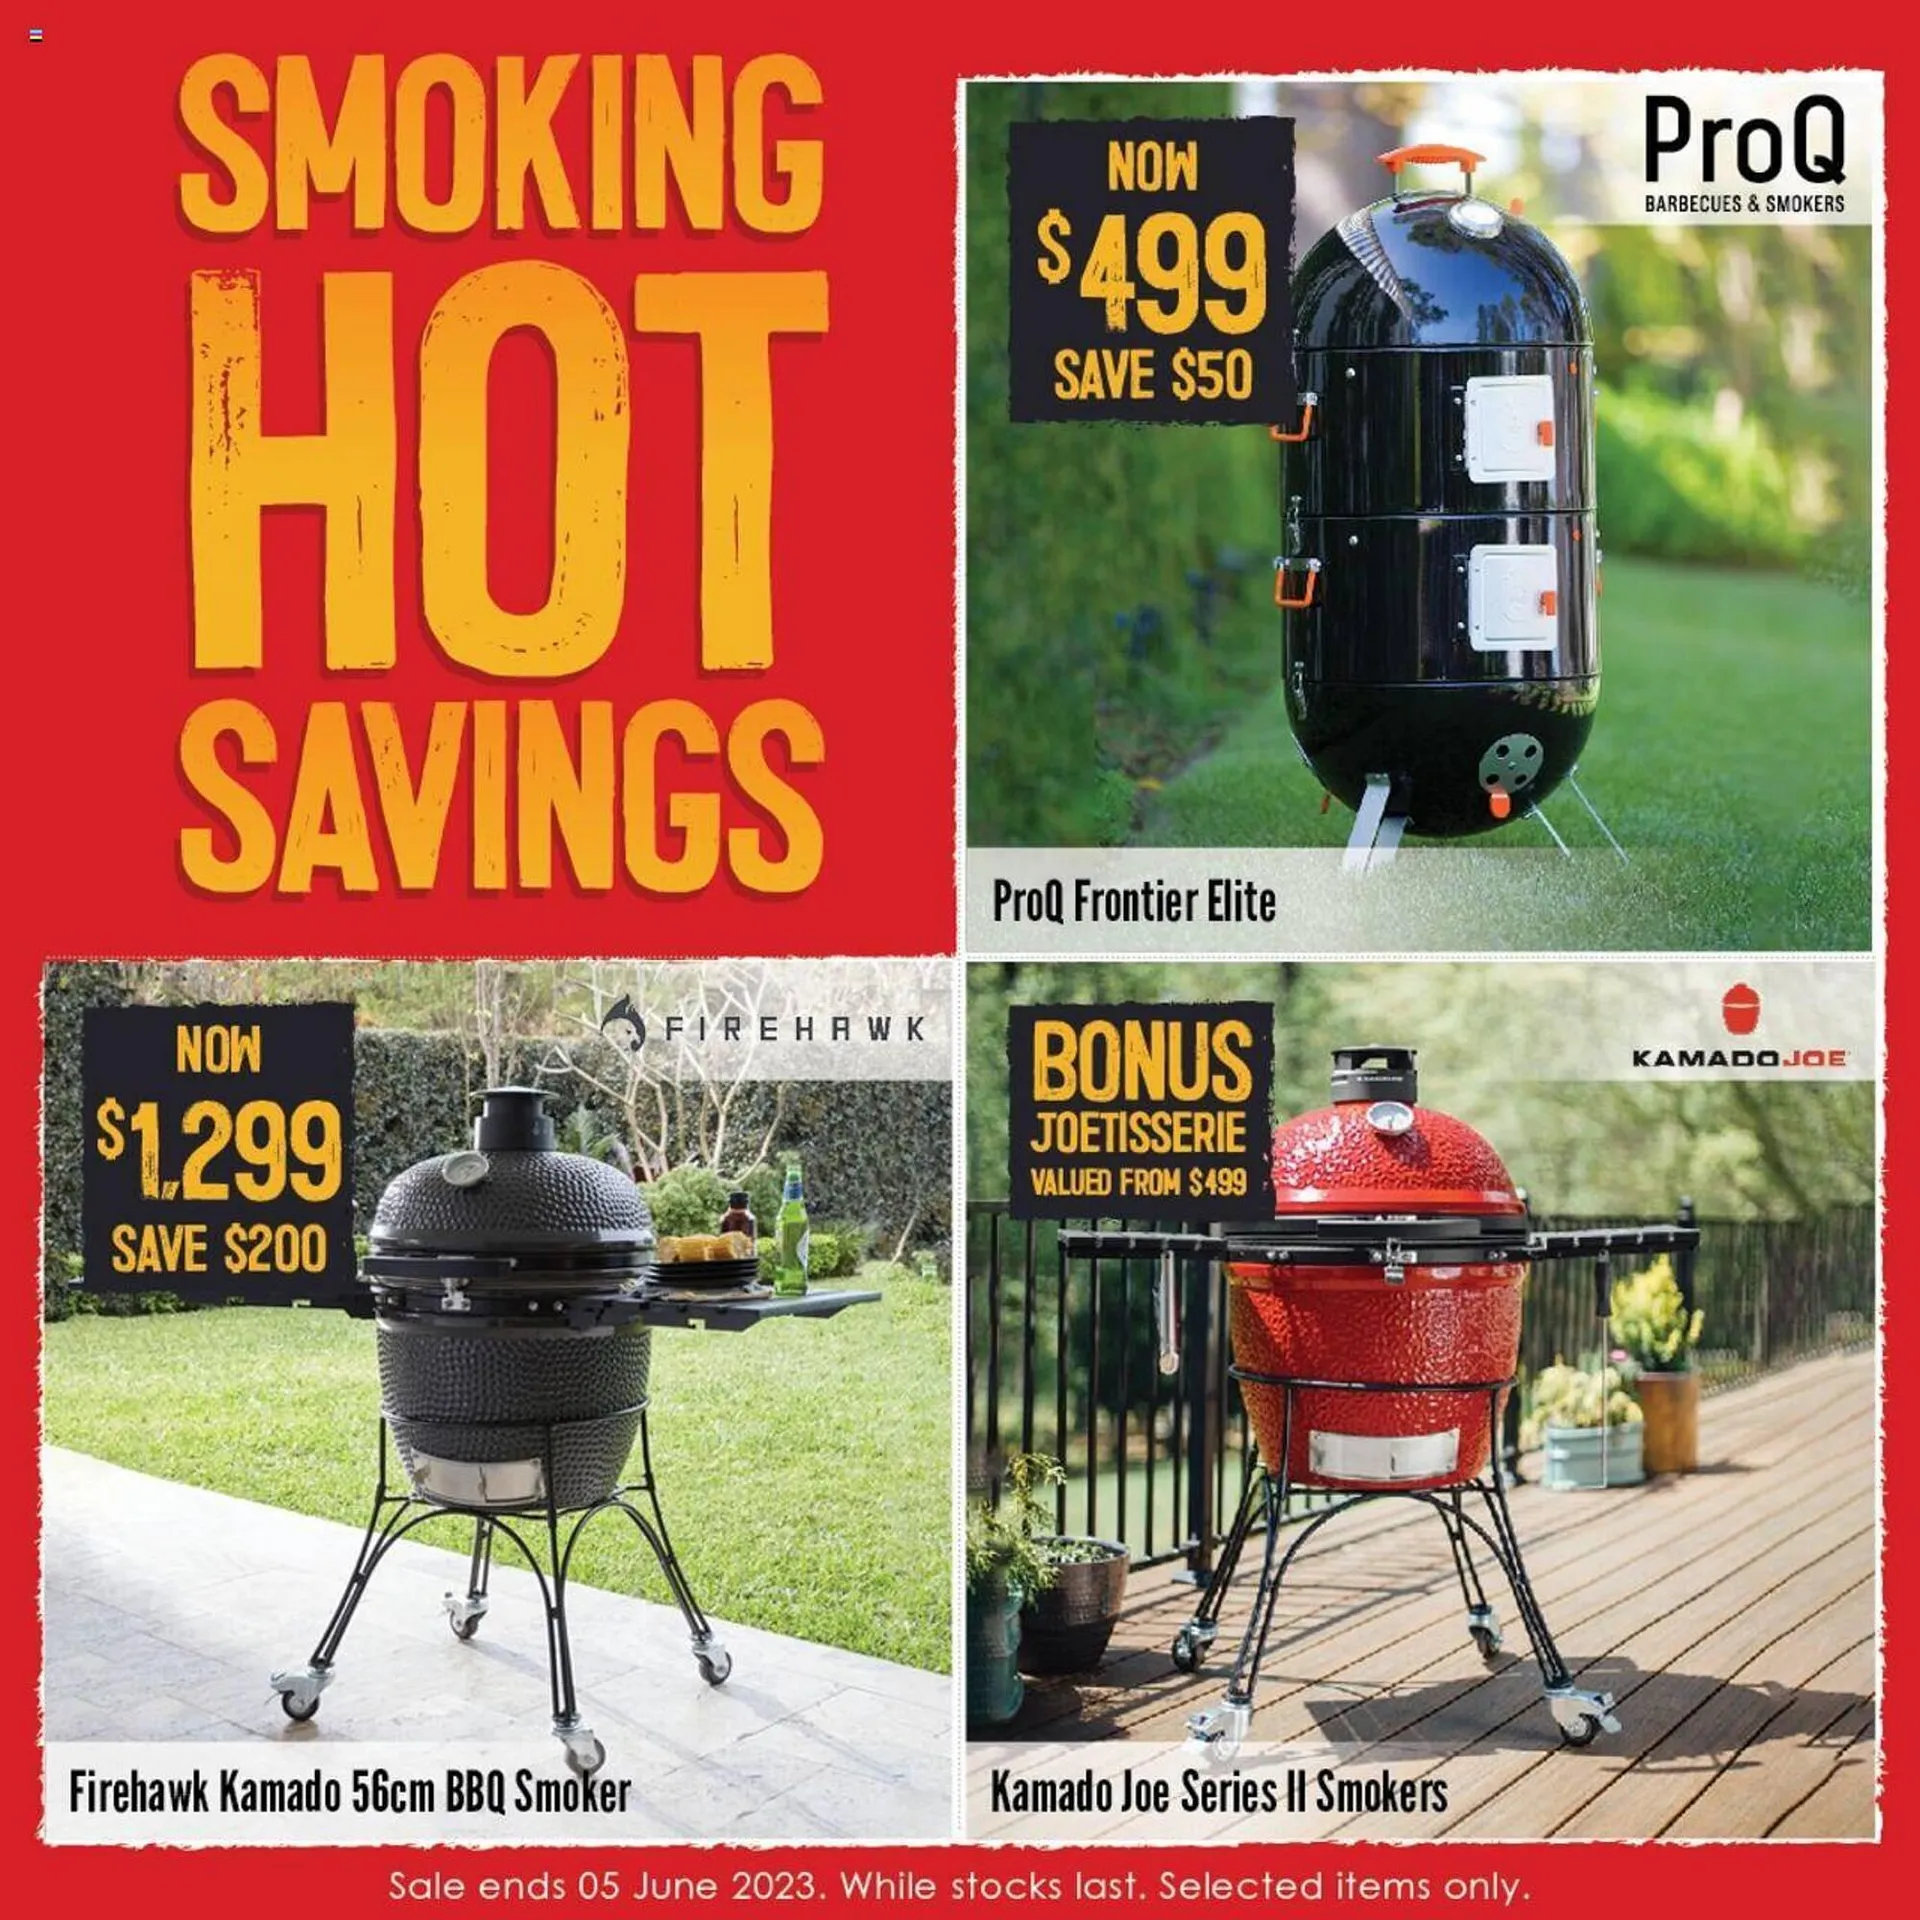 Barbeques Galore catalogue - 3